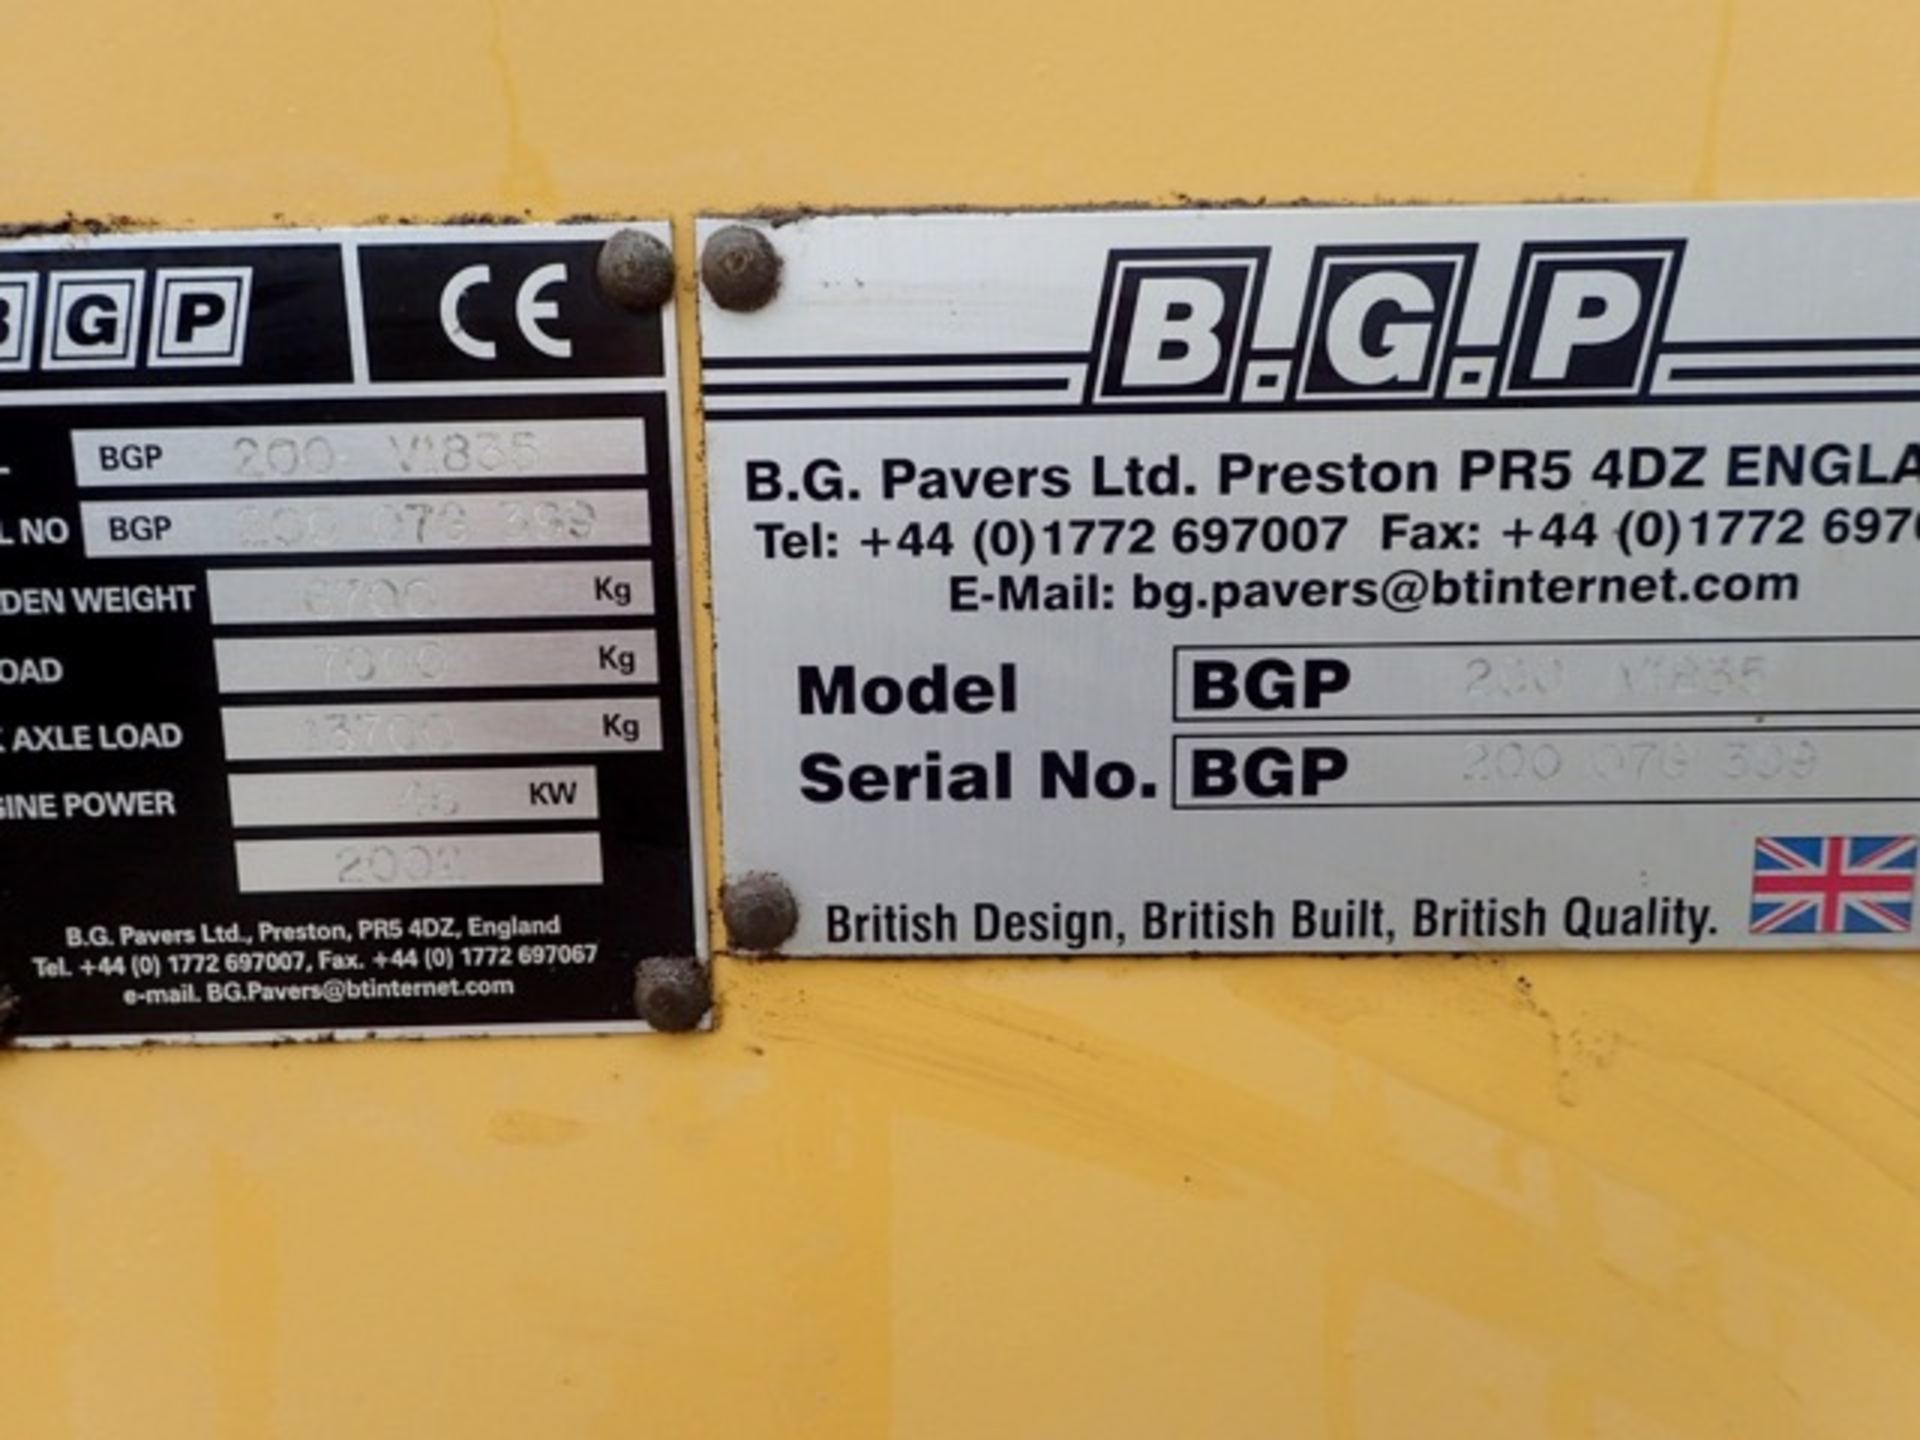 BGP 200-2 diesel driven wheeled paver Year: 2002 S/N: 20007G309 Recorded Hours: 2776 ** This lot - Image 10 of 10